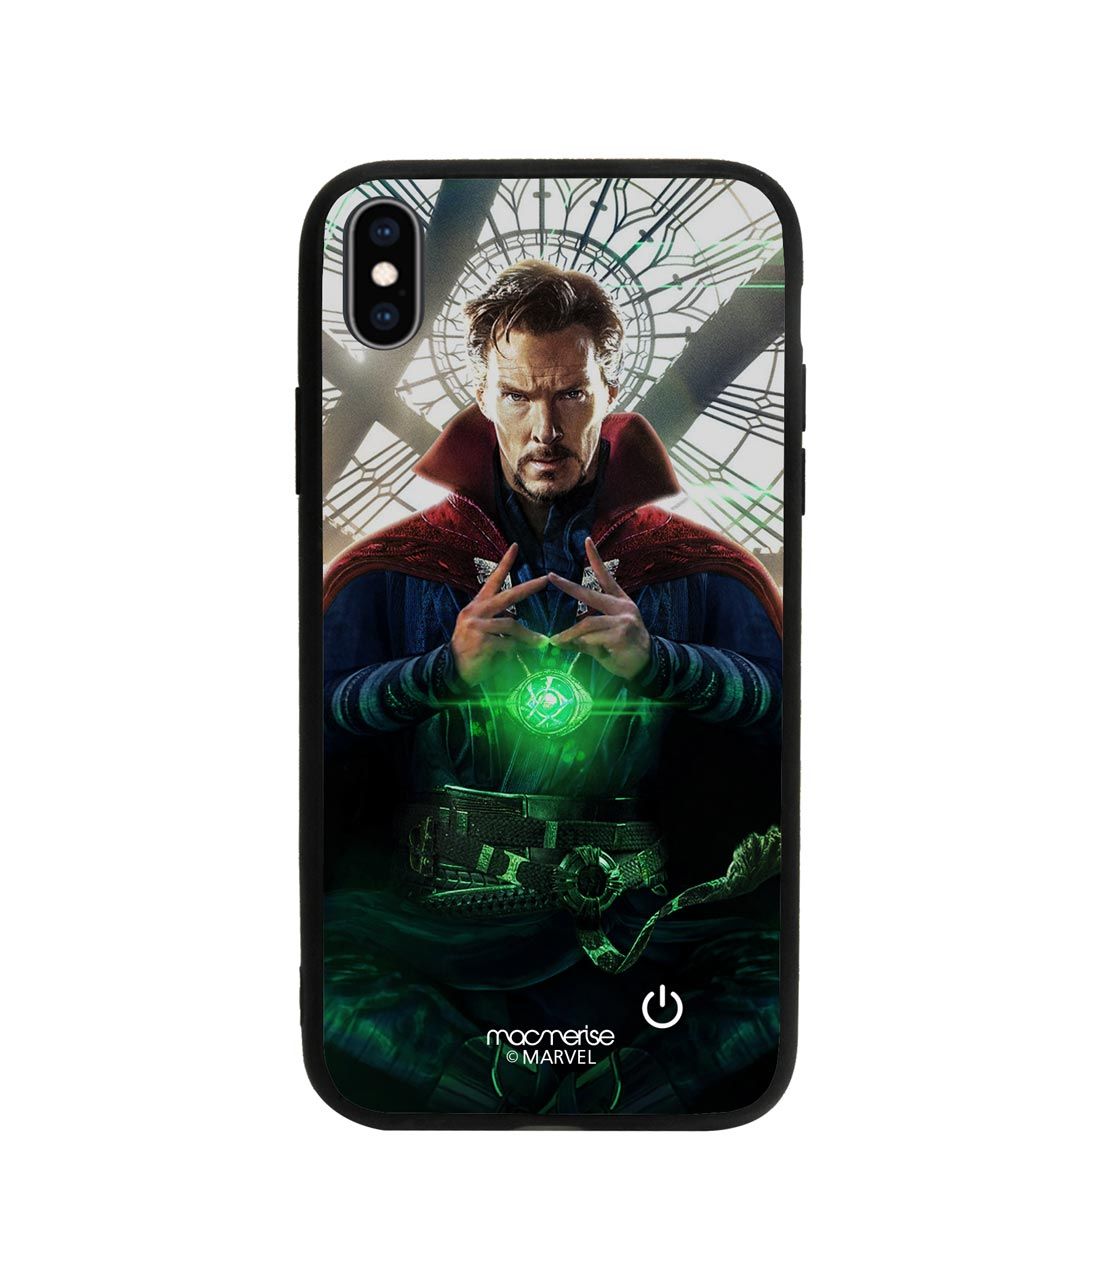 Eye of Agamotto - Lumous LED Phone Case for iPhone XS Max